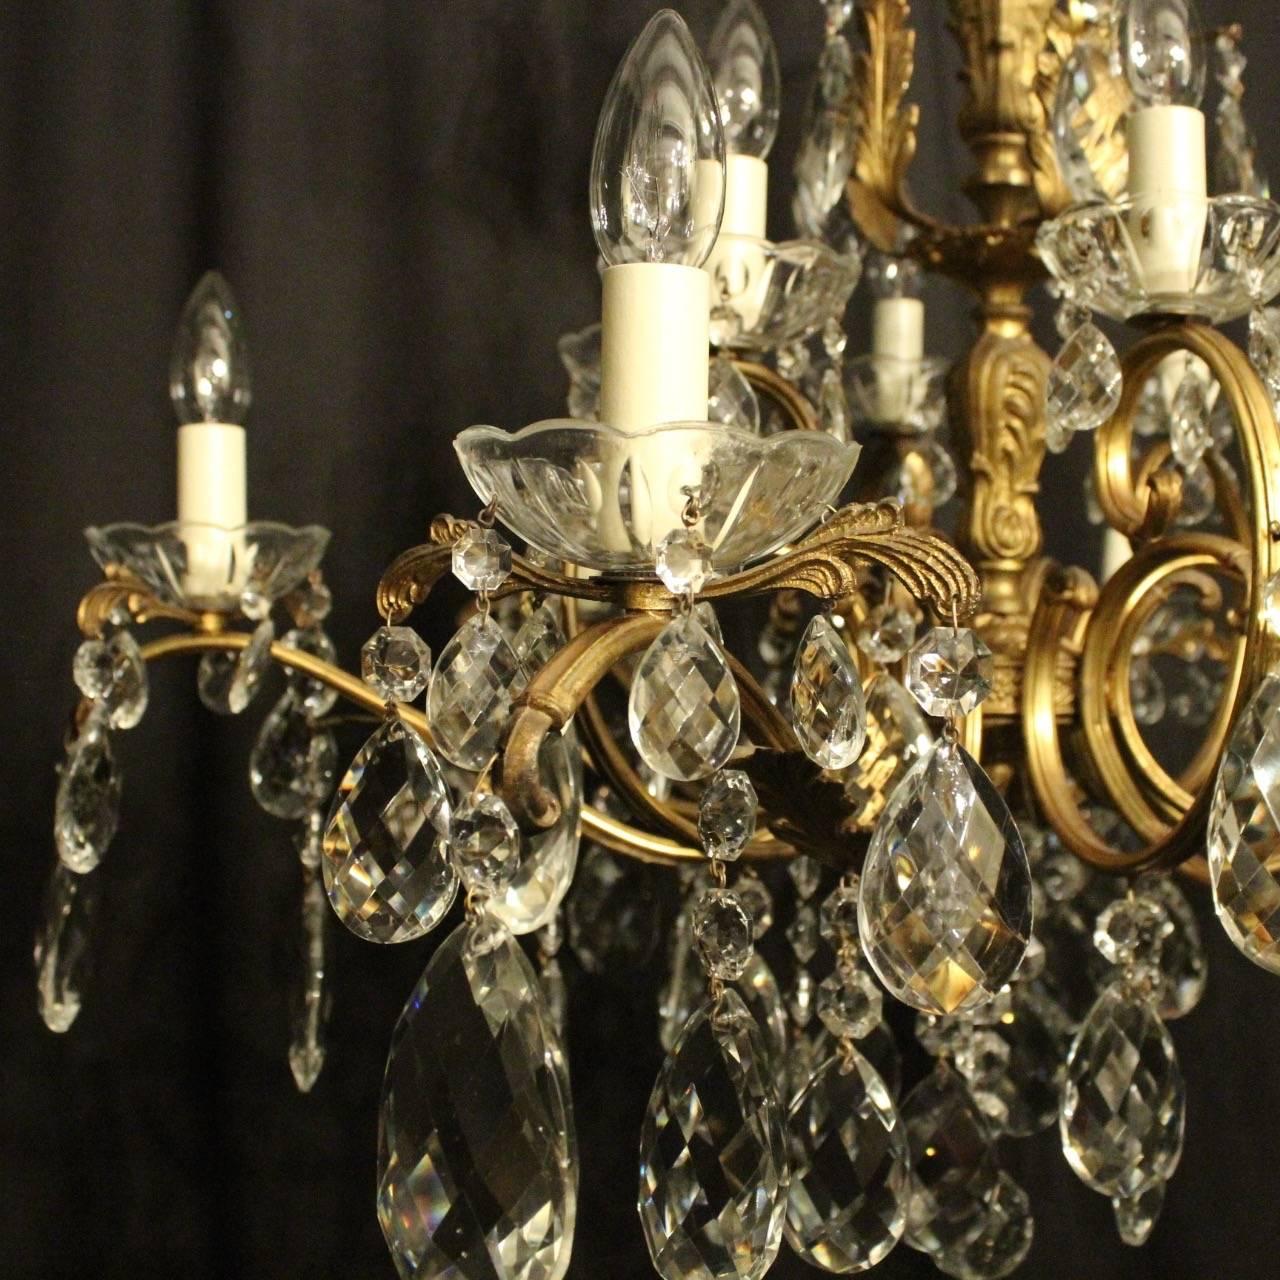 An Italian gilded cast brass and crystal twelve-light double tiered antique chandelier, the leaf scrolling arms with Acanthus leaf outcrops and glass bobeche drip pans, issuing from an ornately cast baluster central column and Acanthus leaf mid and